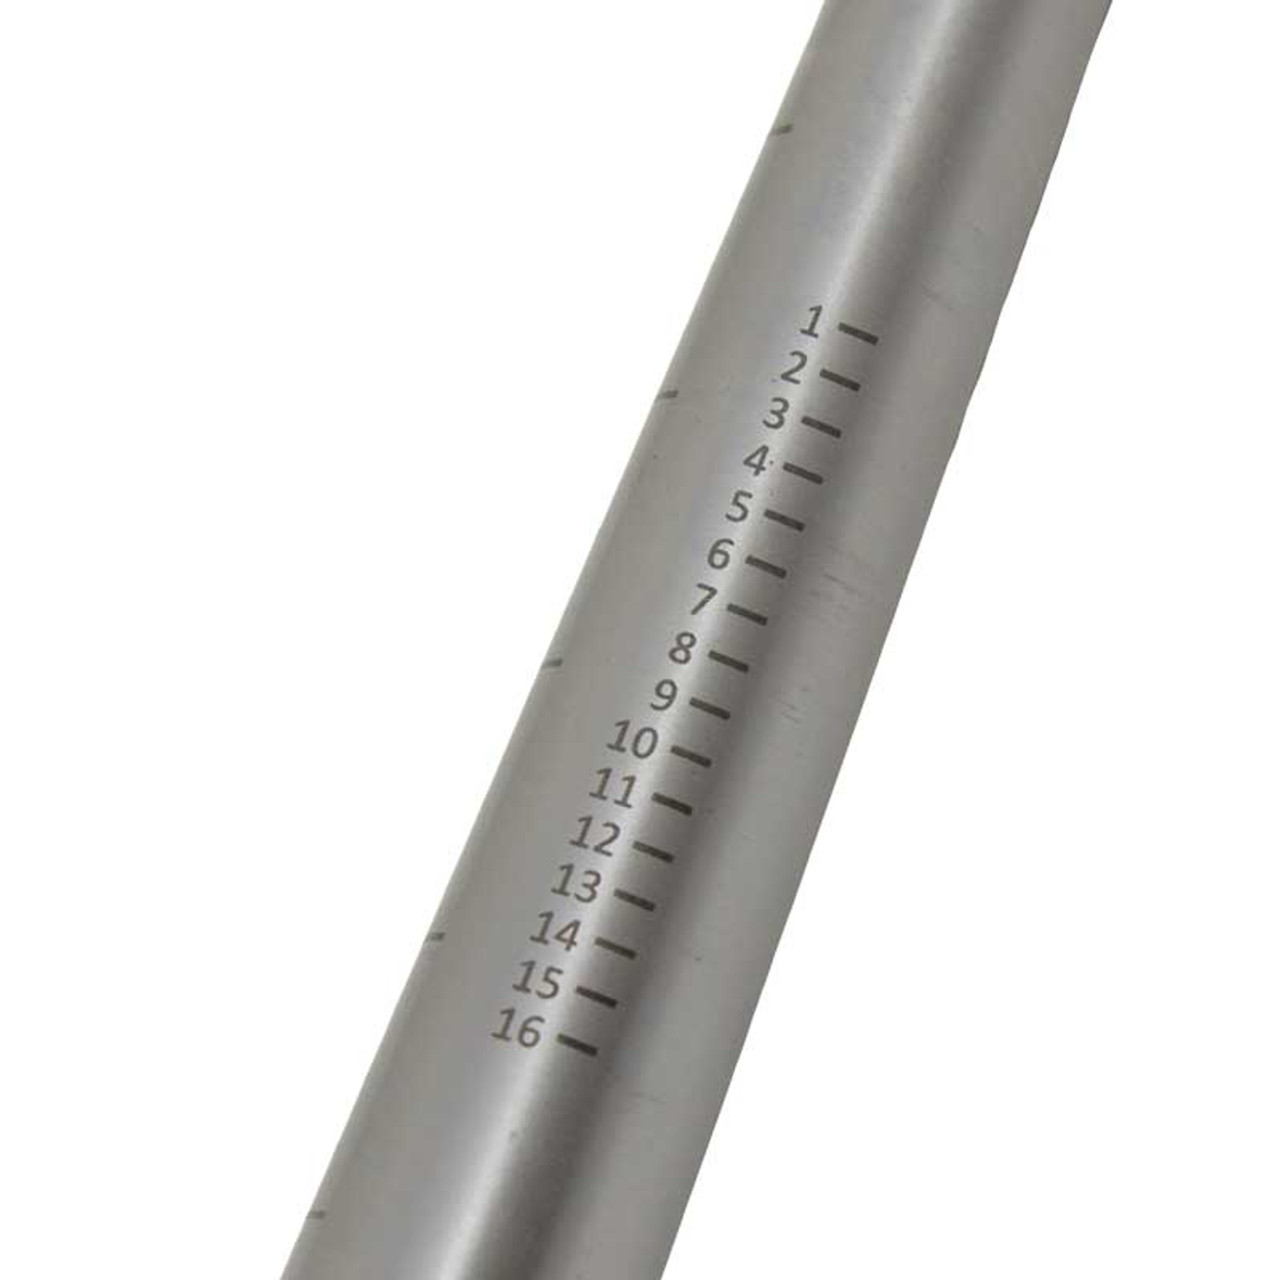 Ring Mandrel with Ring Sizes - Solid Steel —